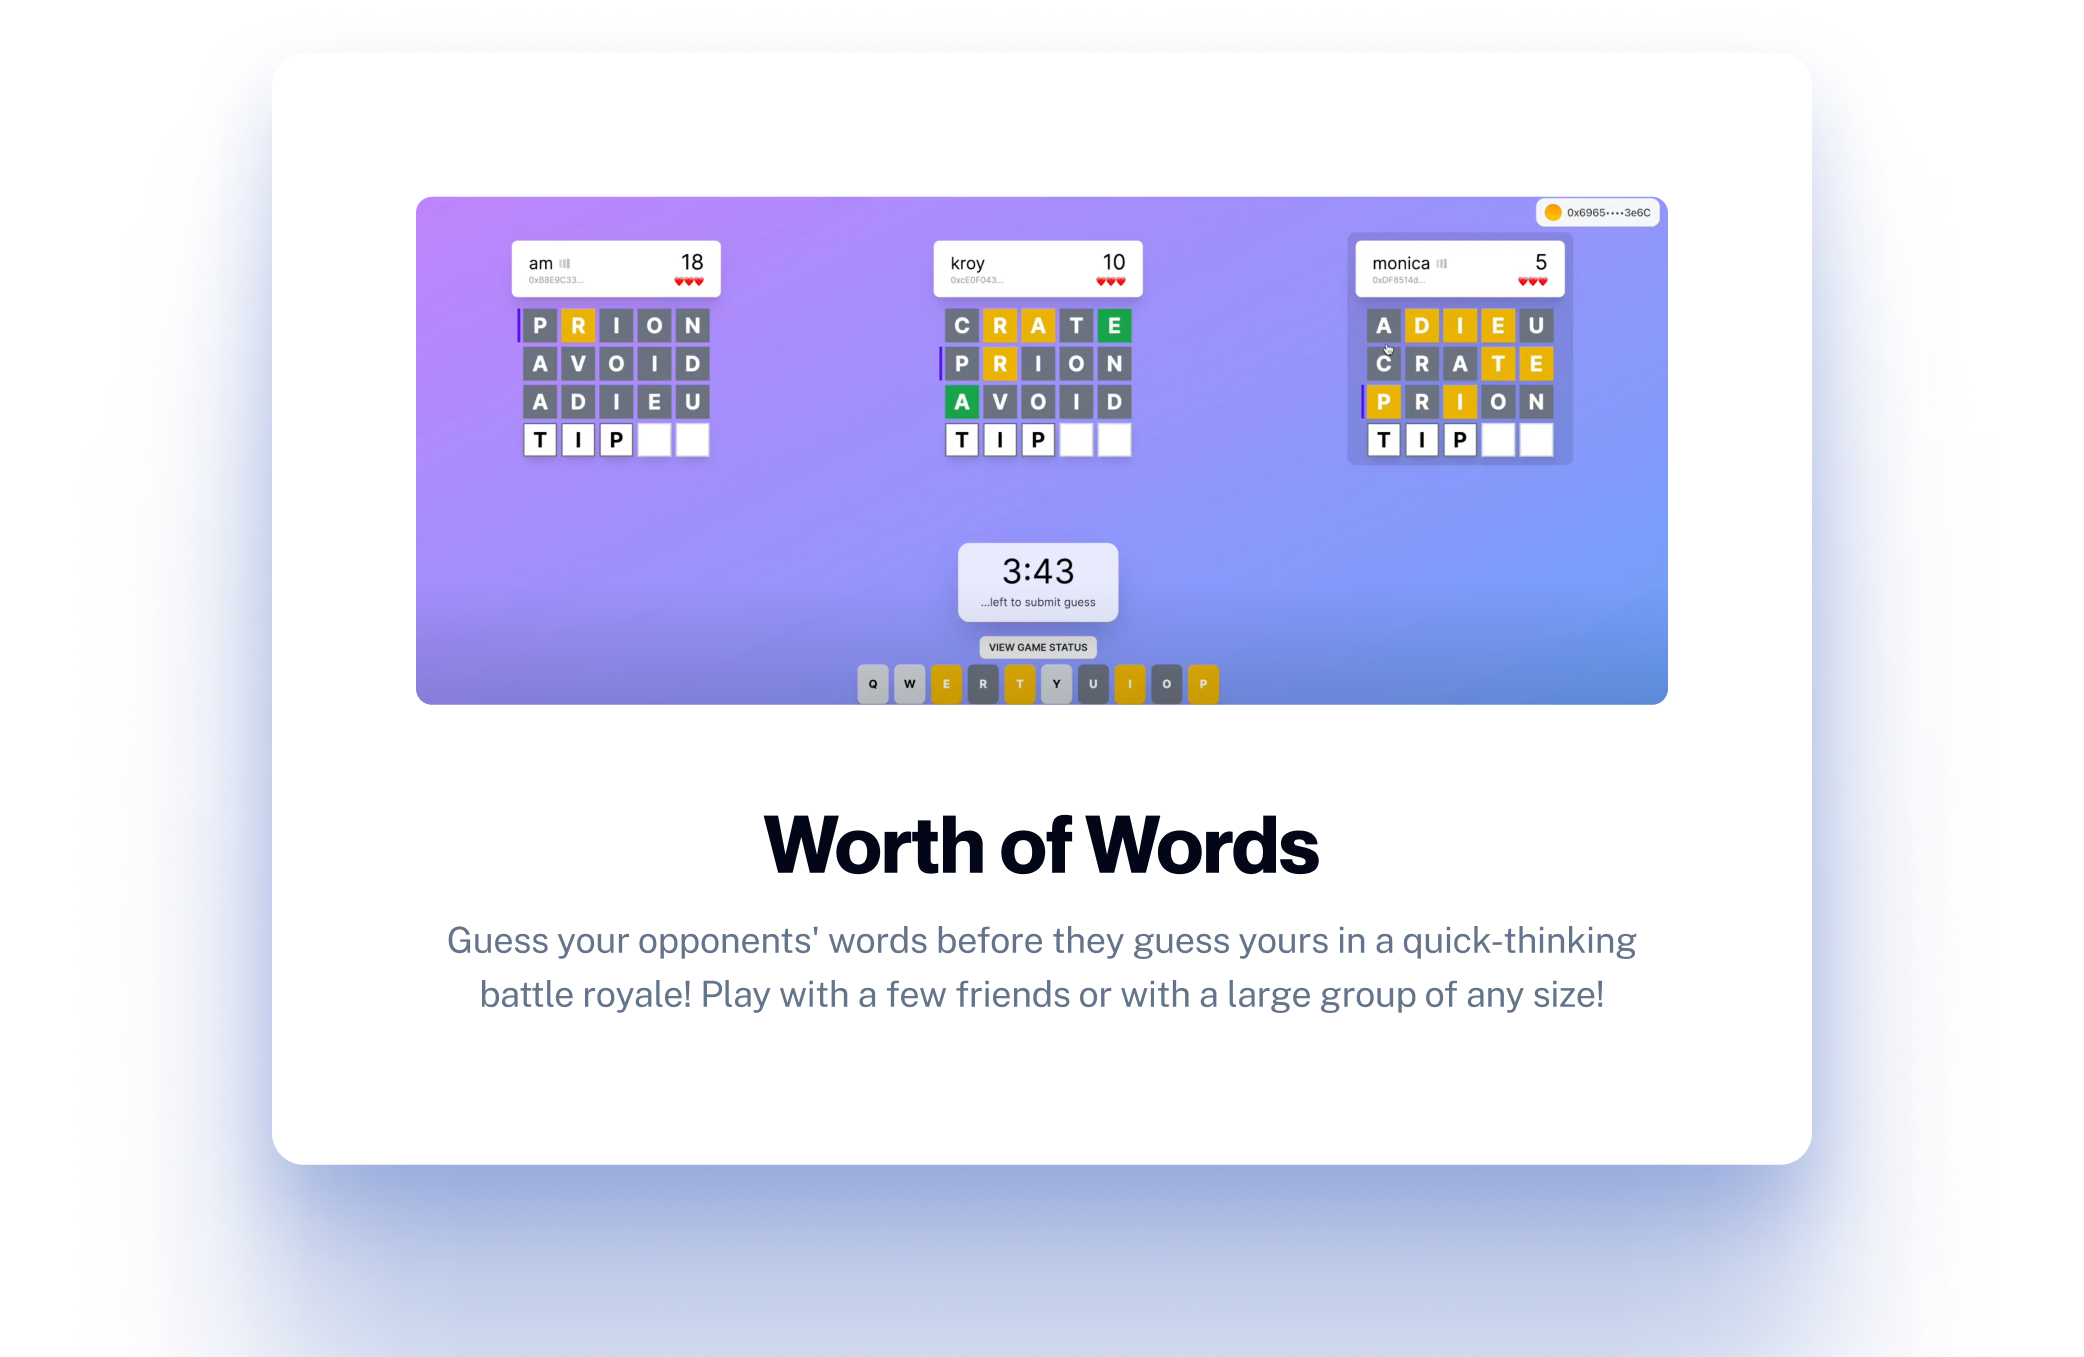 worth of words demo